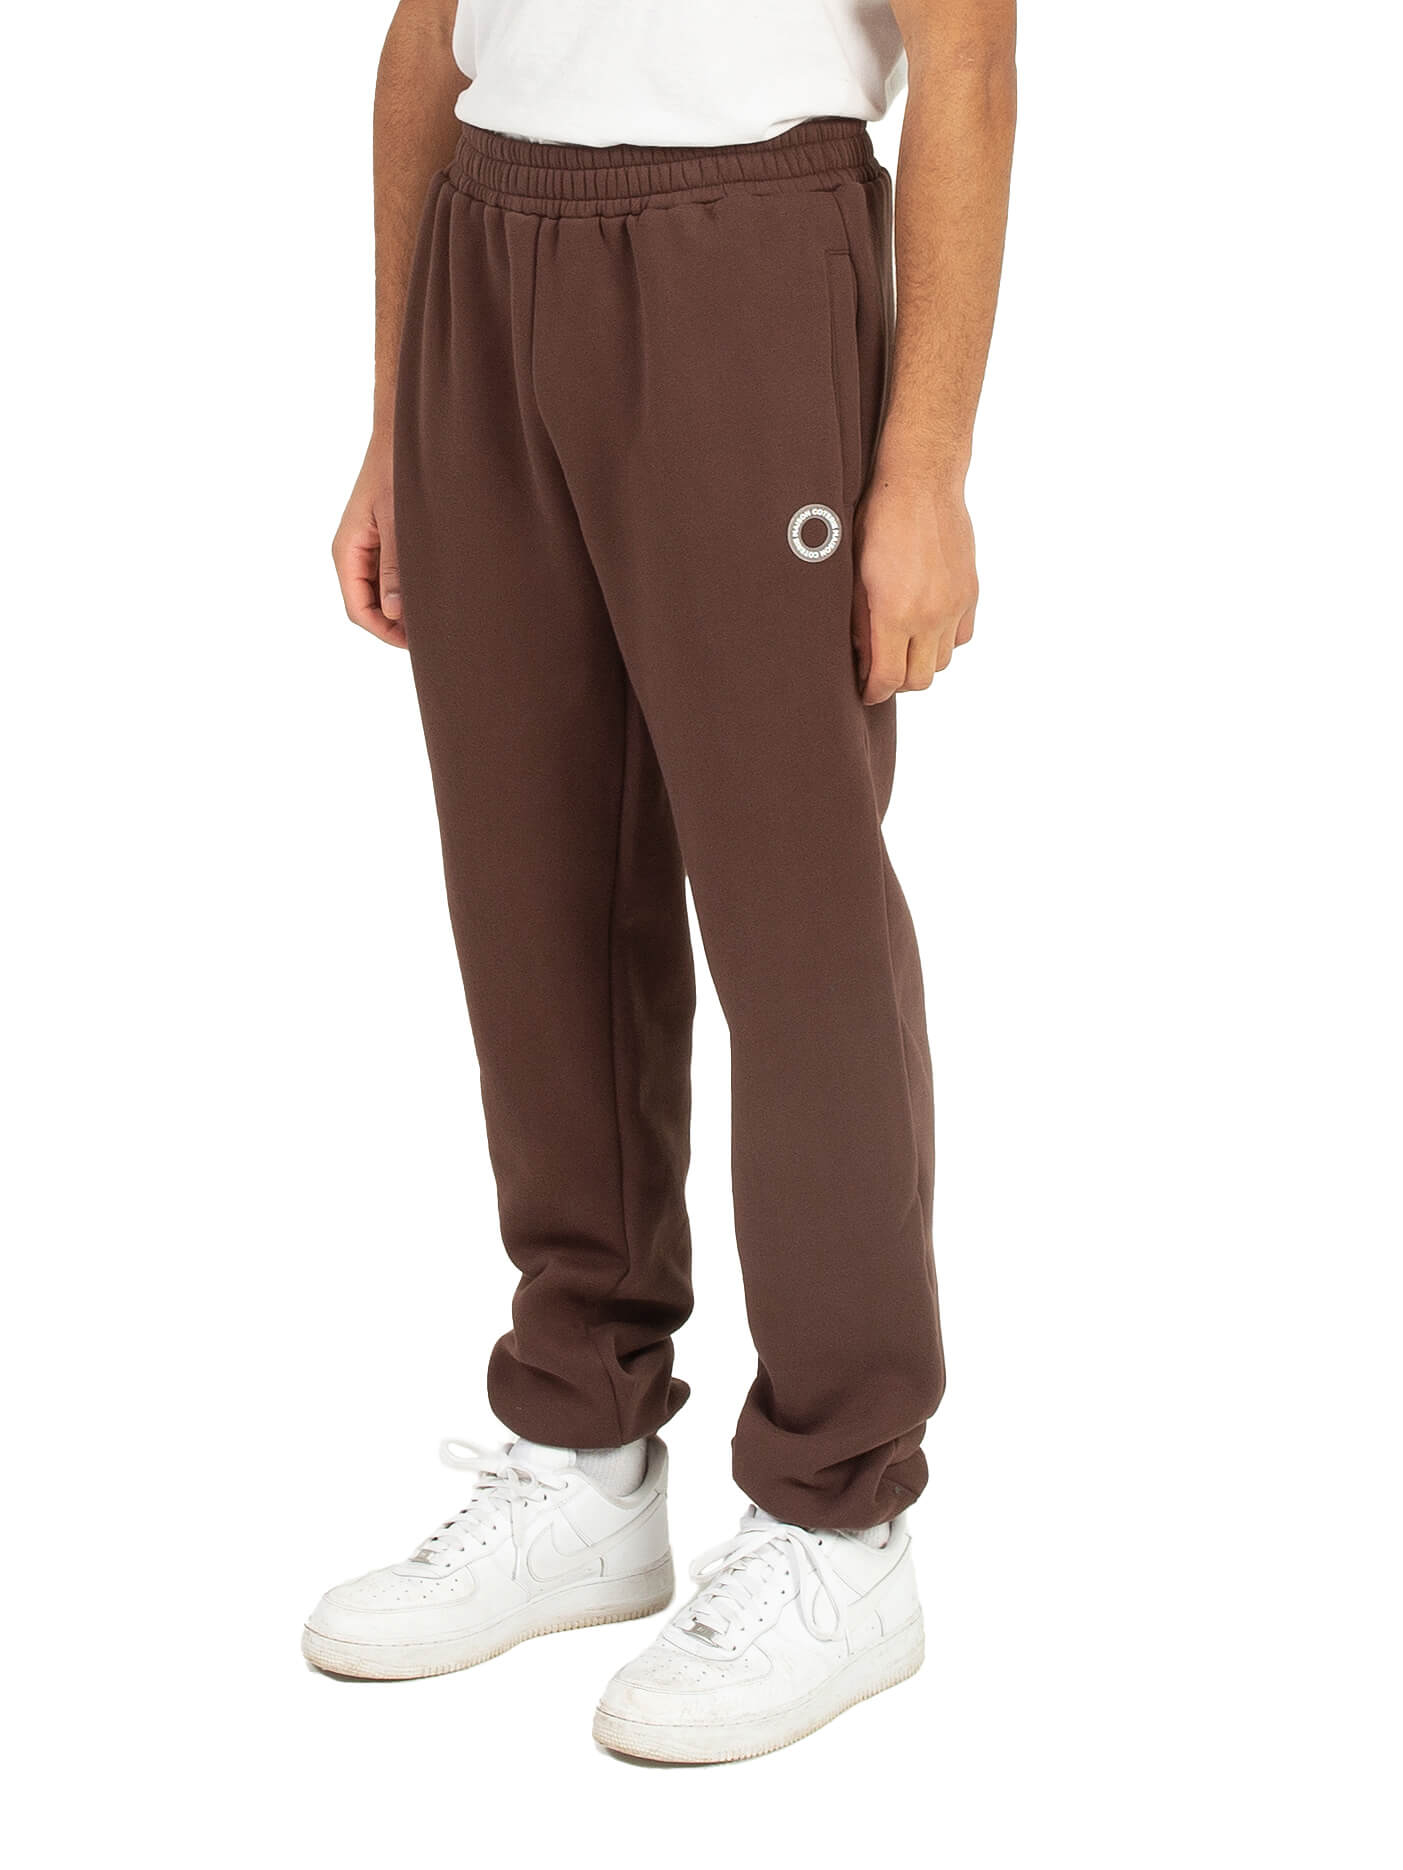 Kaylo - Brown Sweatpants with Rubber Patch